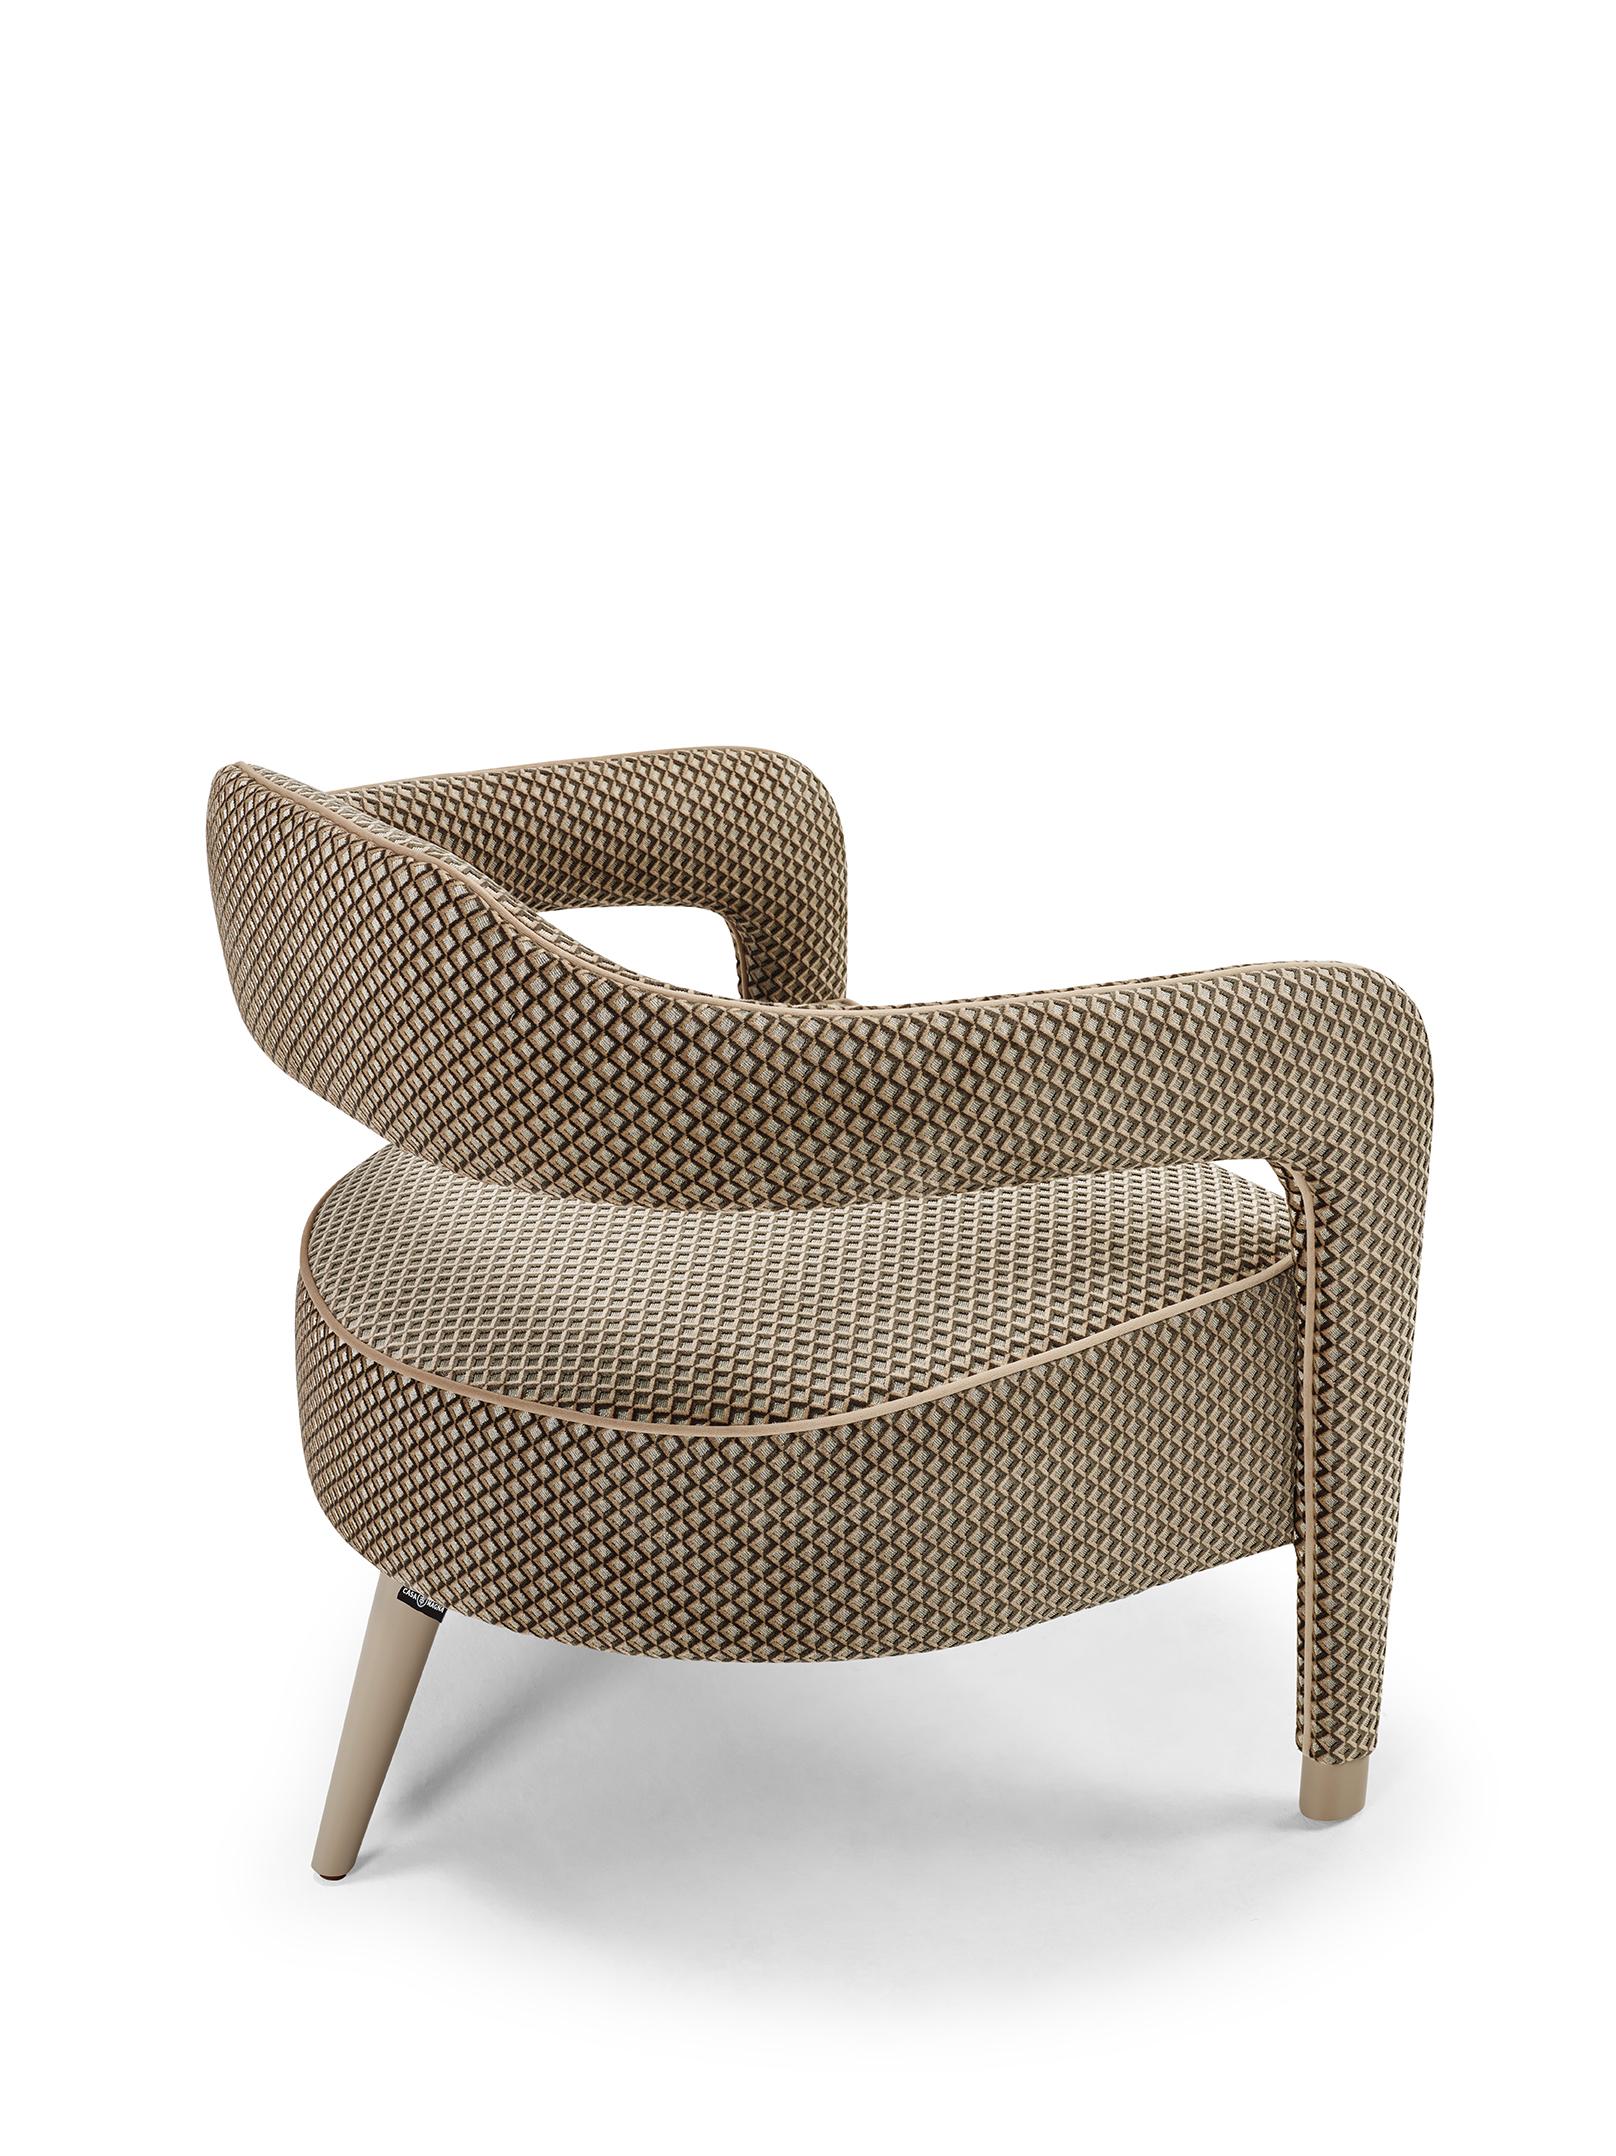 The modern and sophisticated design of INVICTA armchair makes it suitable for any luxury and cosmopolitan interior design inspiration. With just one leg on the back, in solid wood, the Invicta can be upholstered in fabric, eco-leather, natural